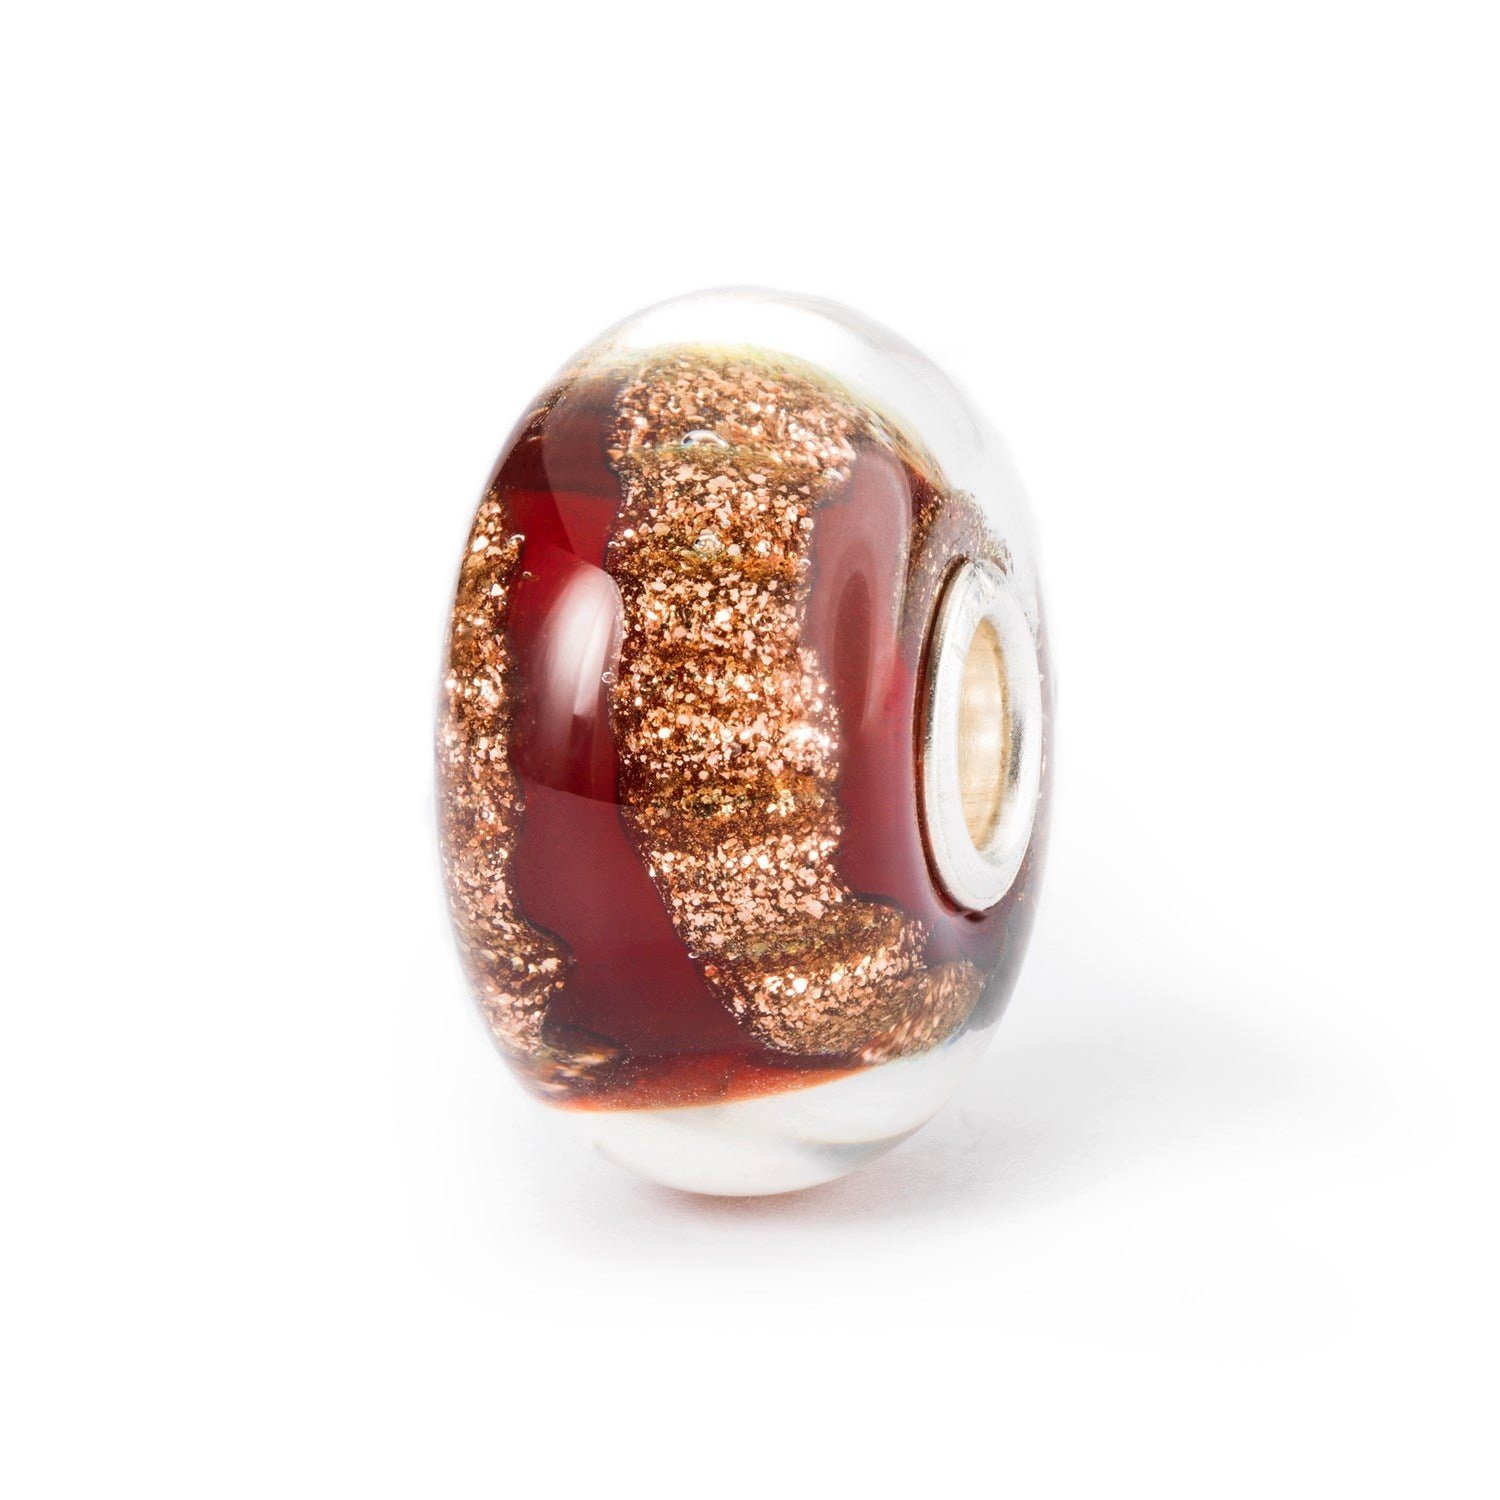 Charm-Armband Royal - Trollbeads Edition, Armband TZZDE-00926 Red Limitierte